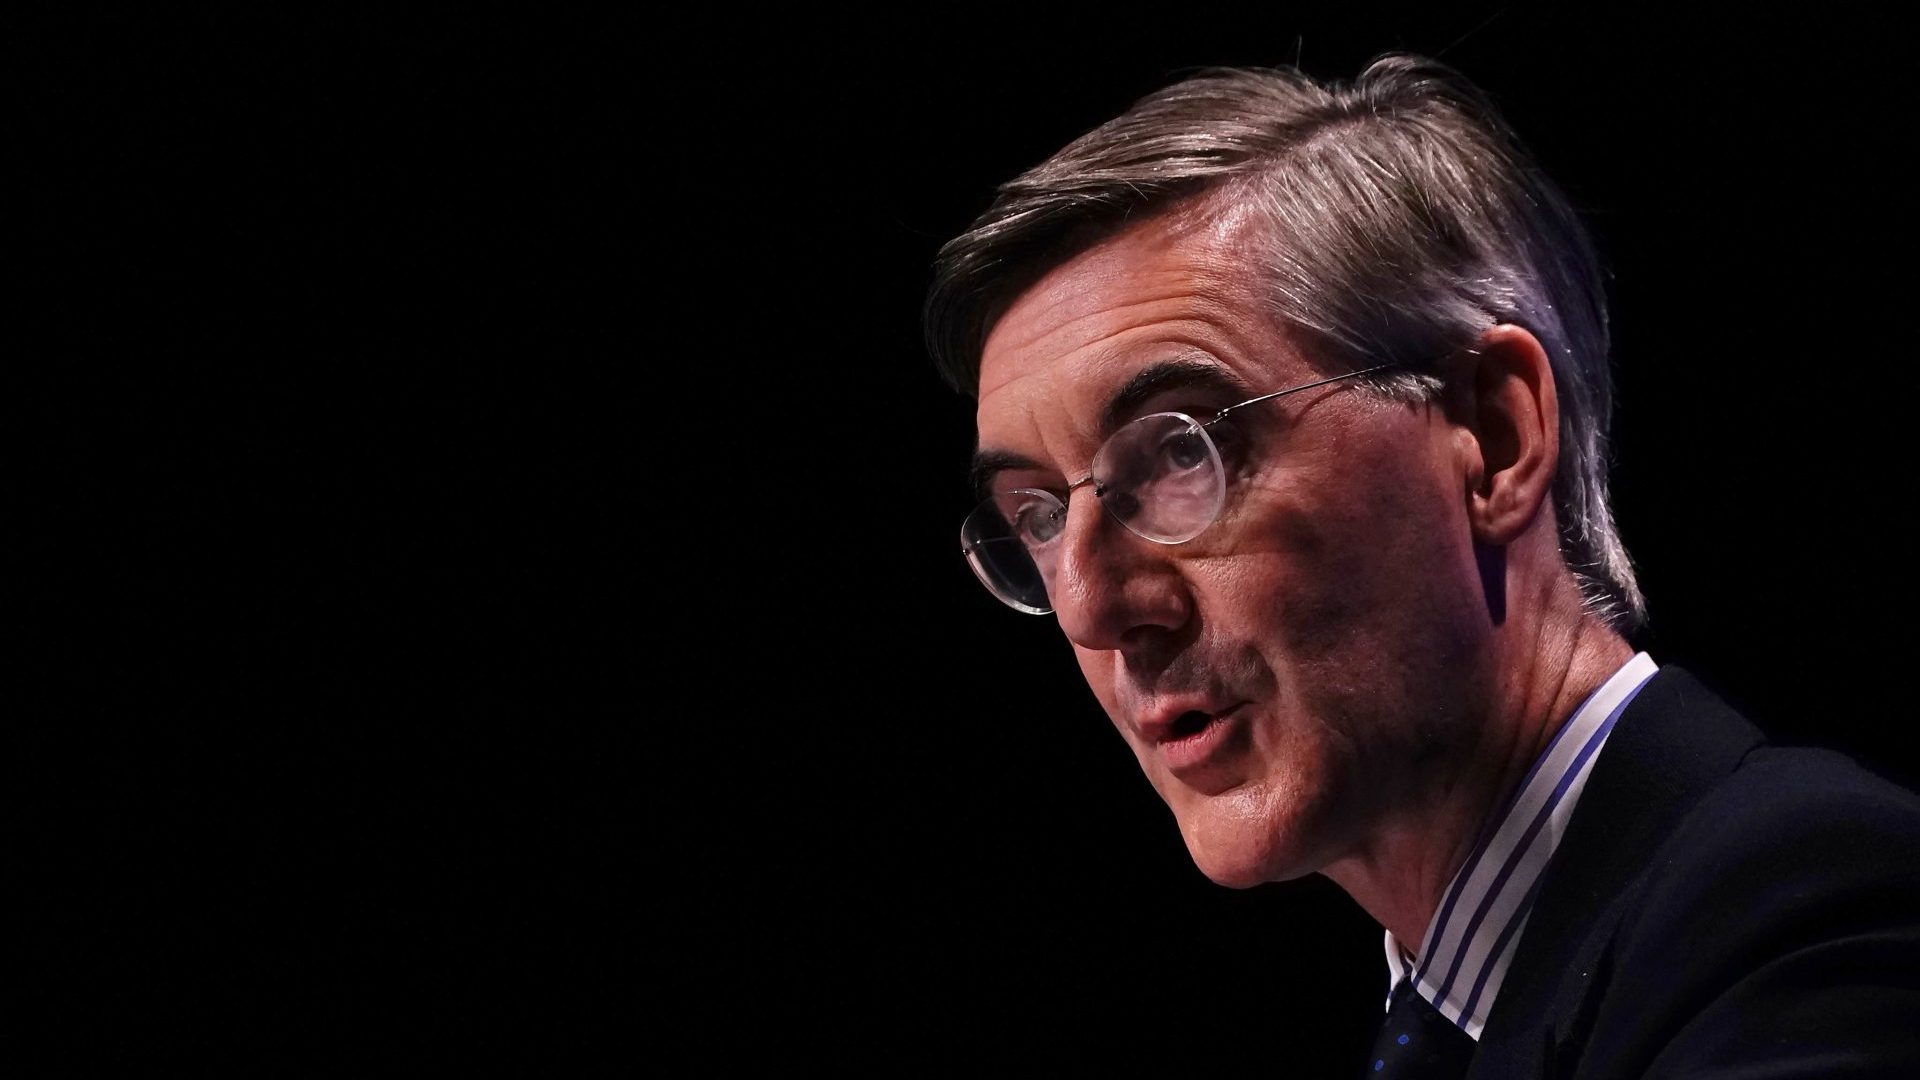 Jacob Rees-Mogg during the Conservative Party annual conference at the International Convention Centre in Birmingham. Photo:  Aaron Chown/PA Wire/PA Images